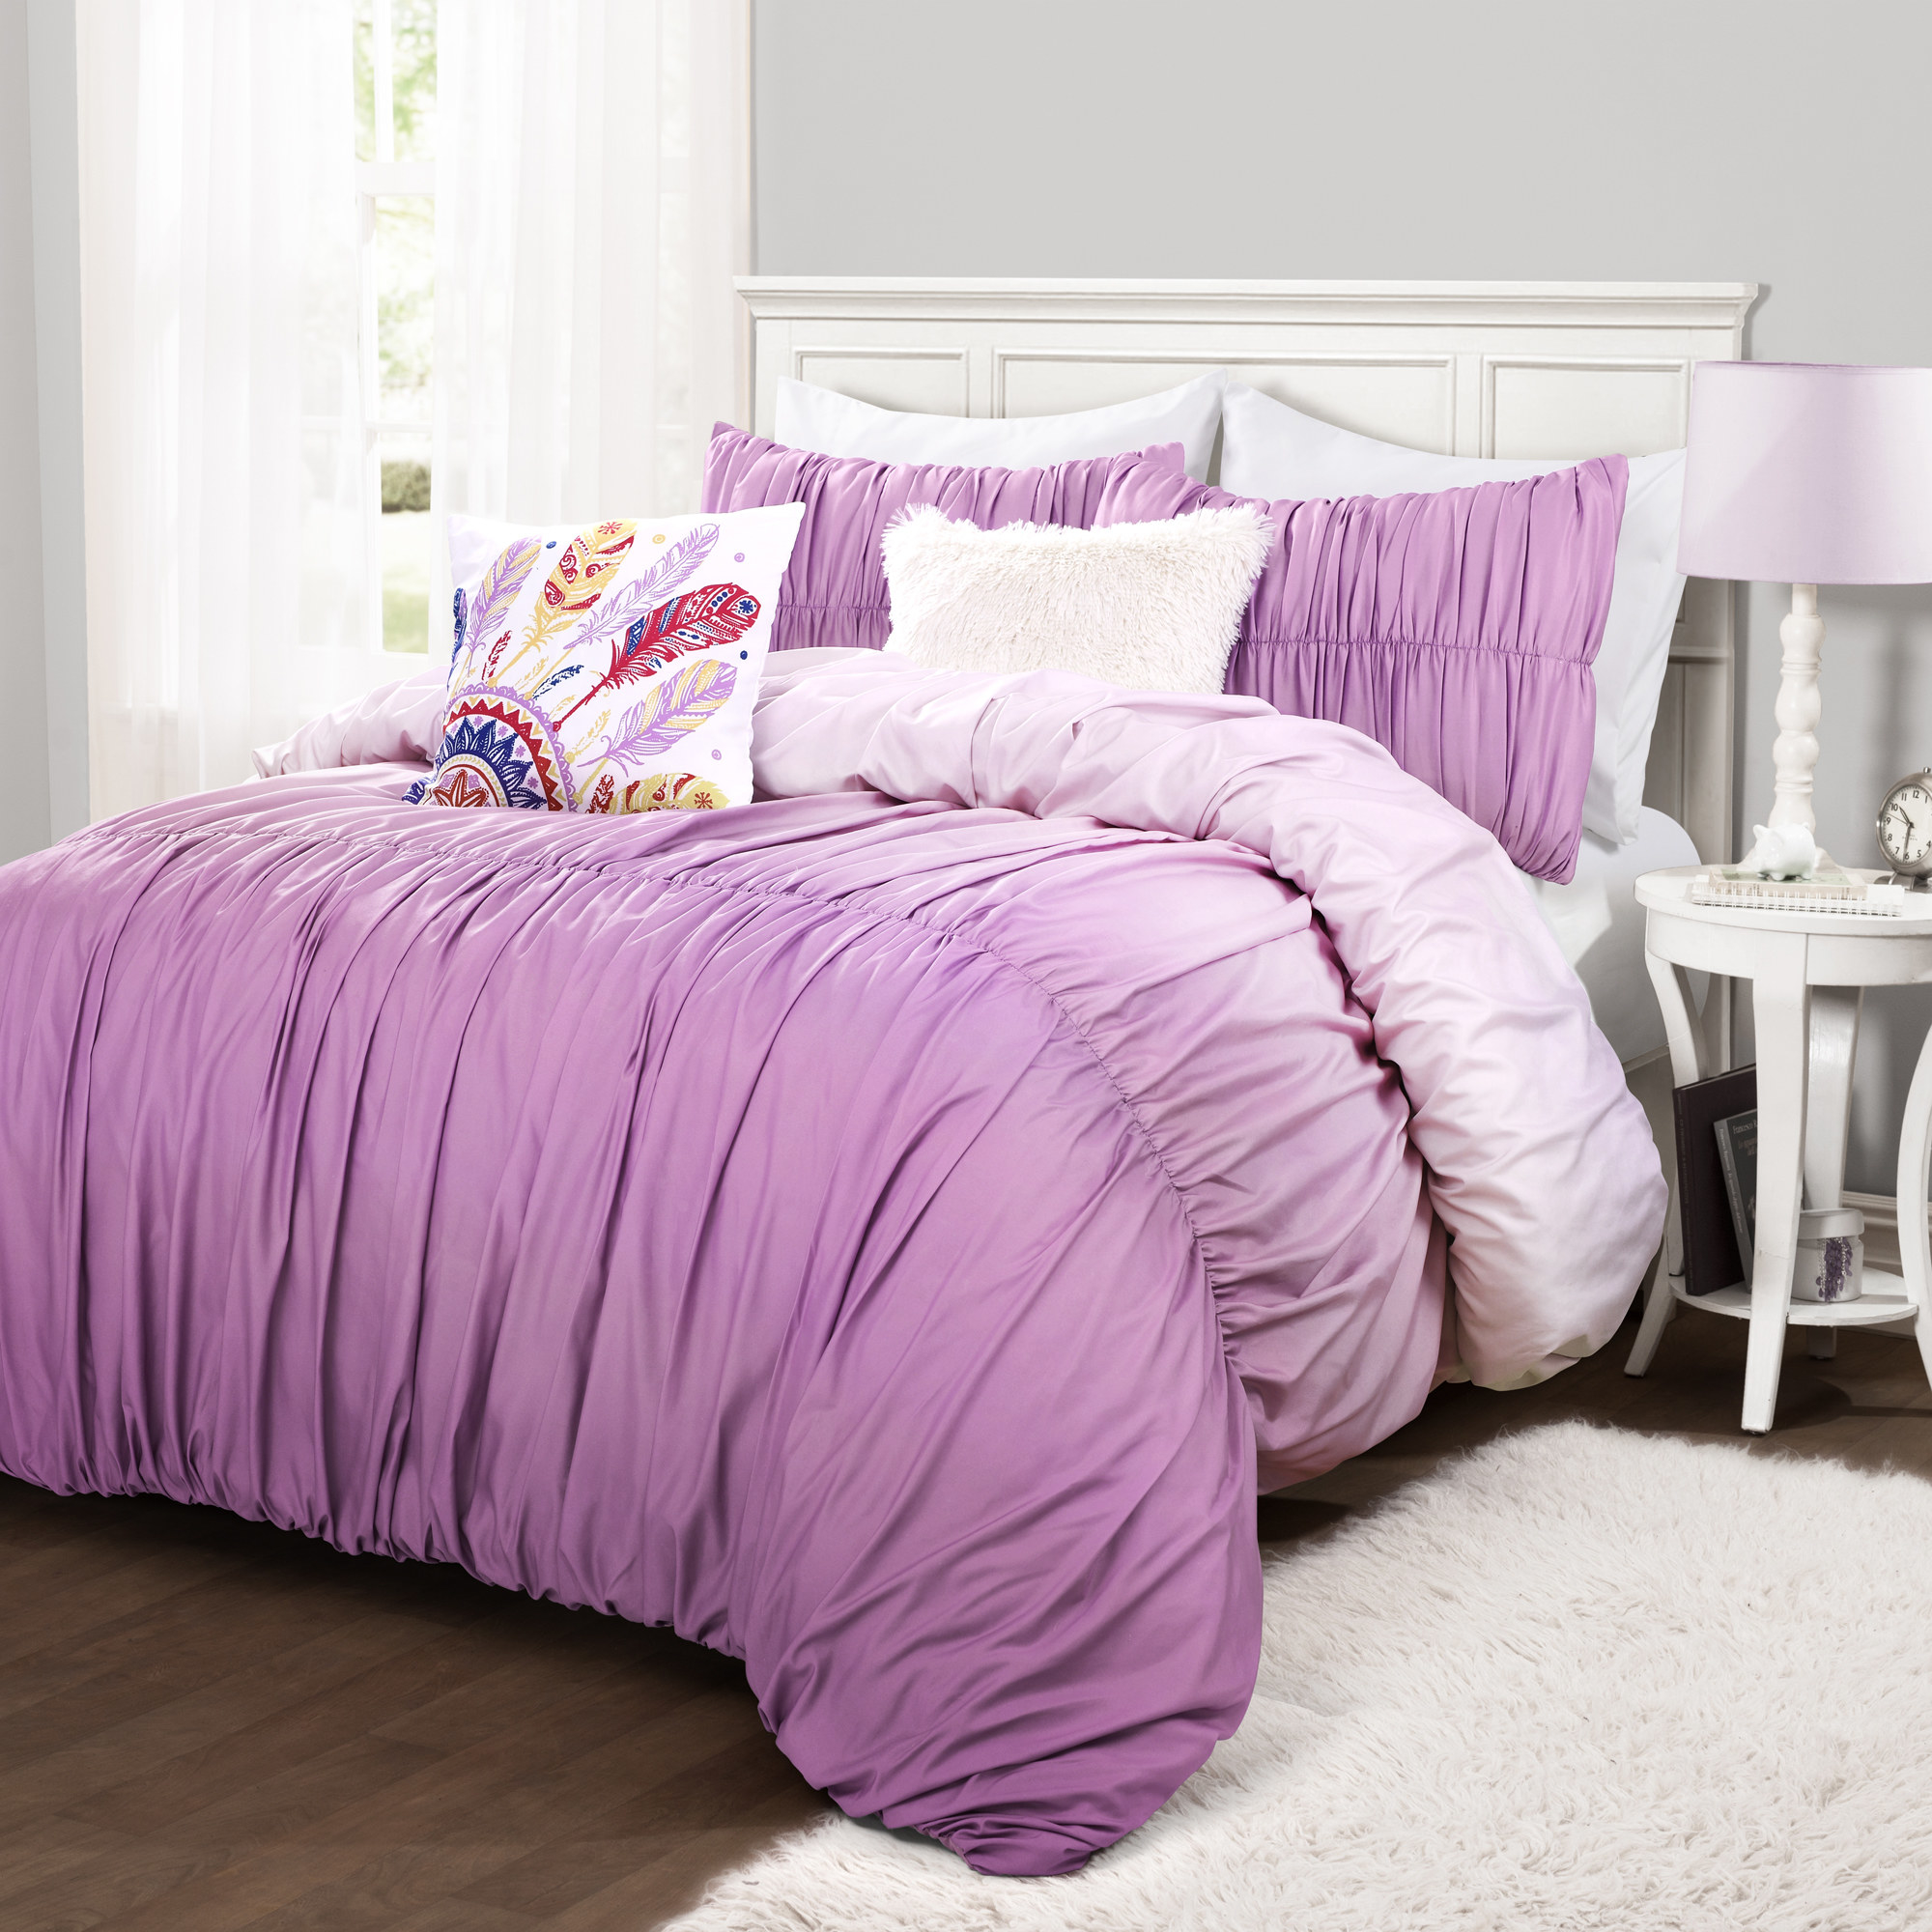 The purple/white gradient-colored comforter set on a bed